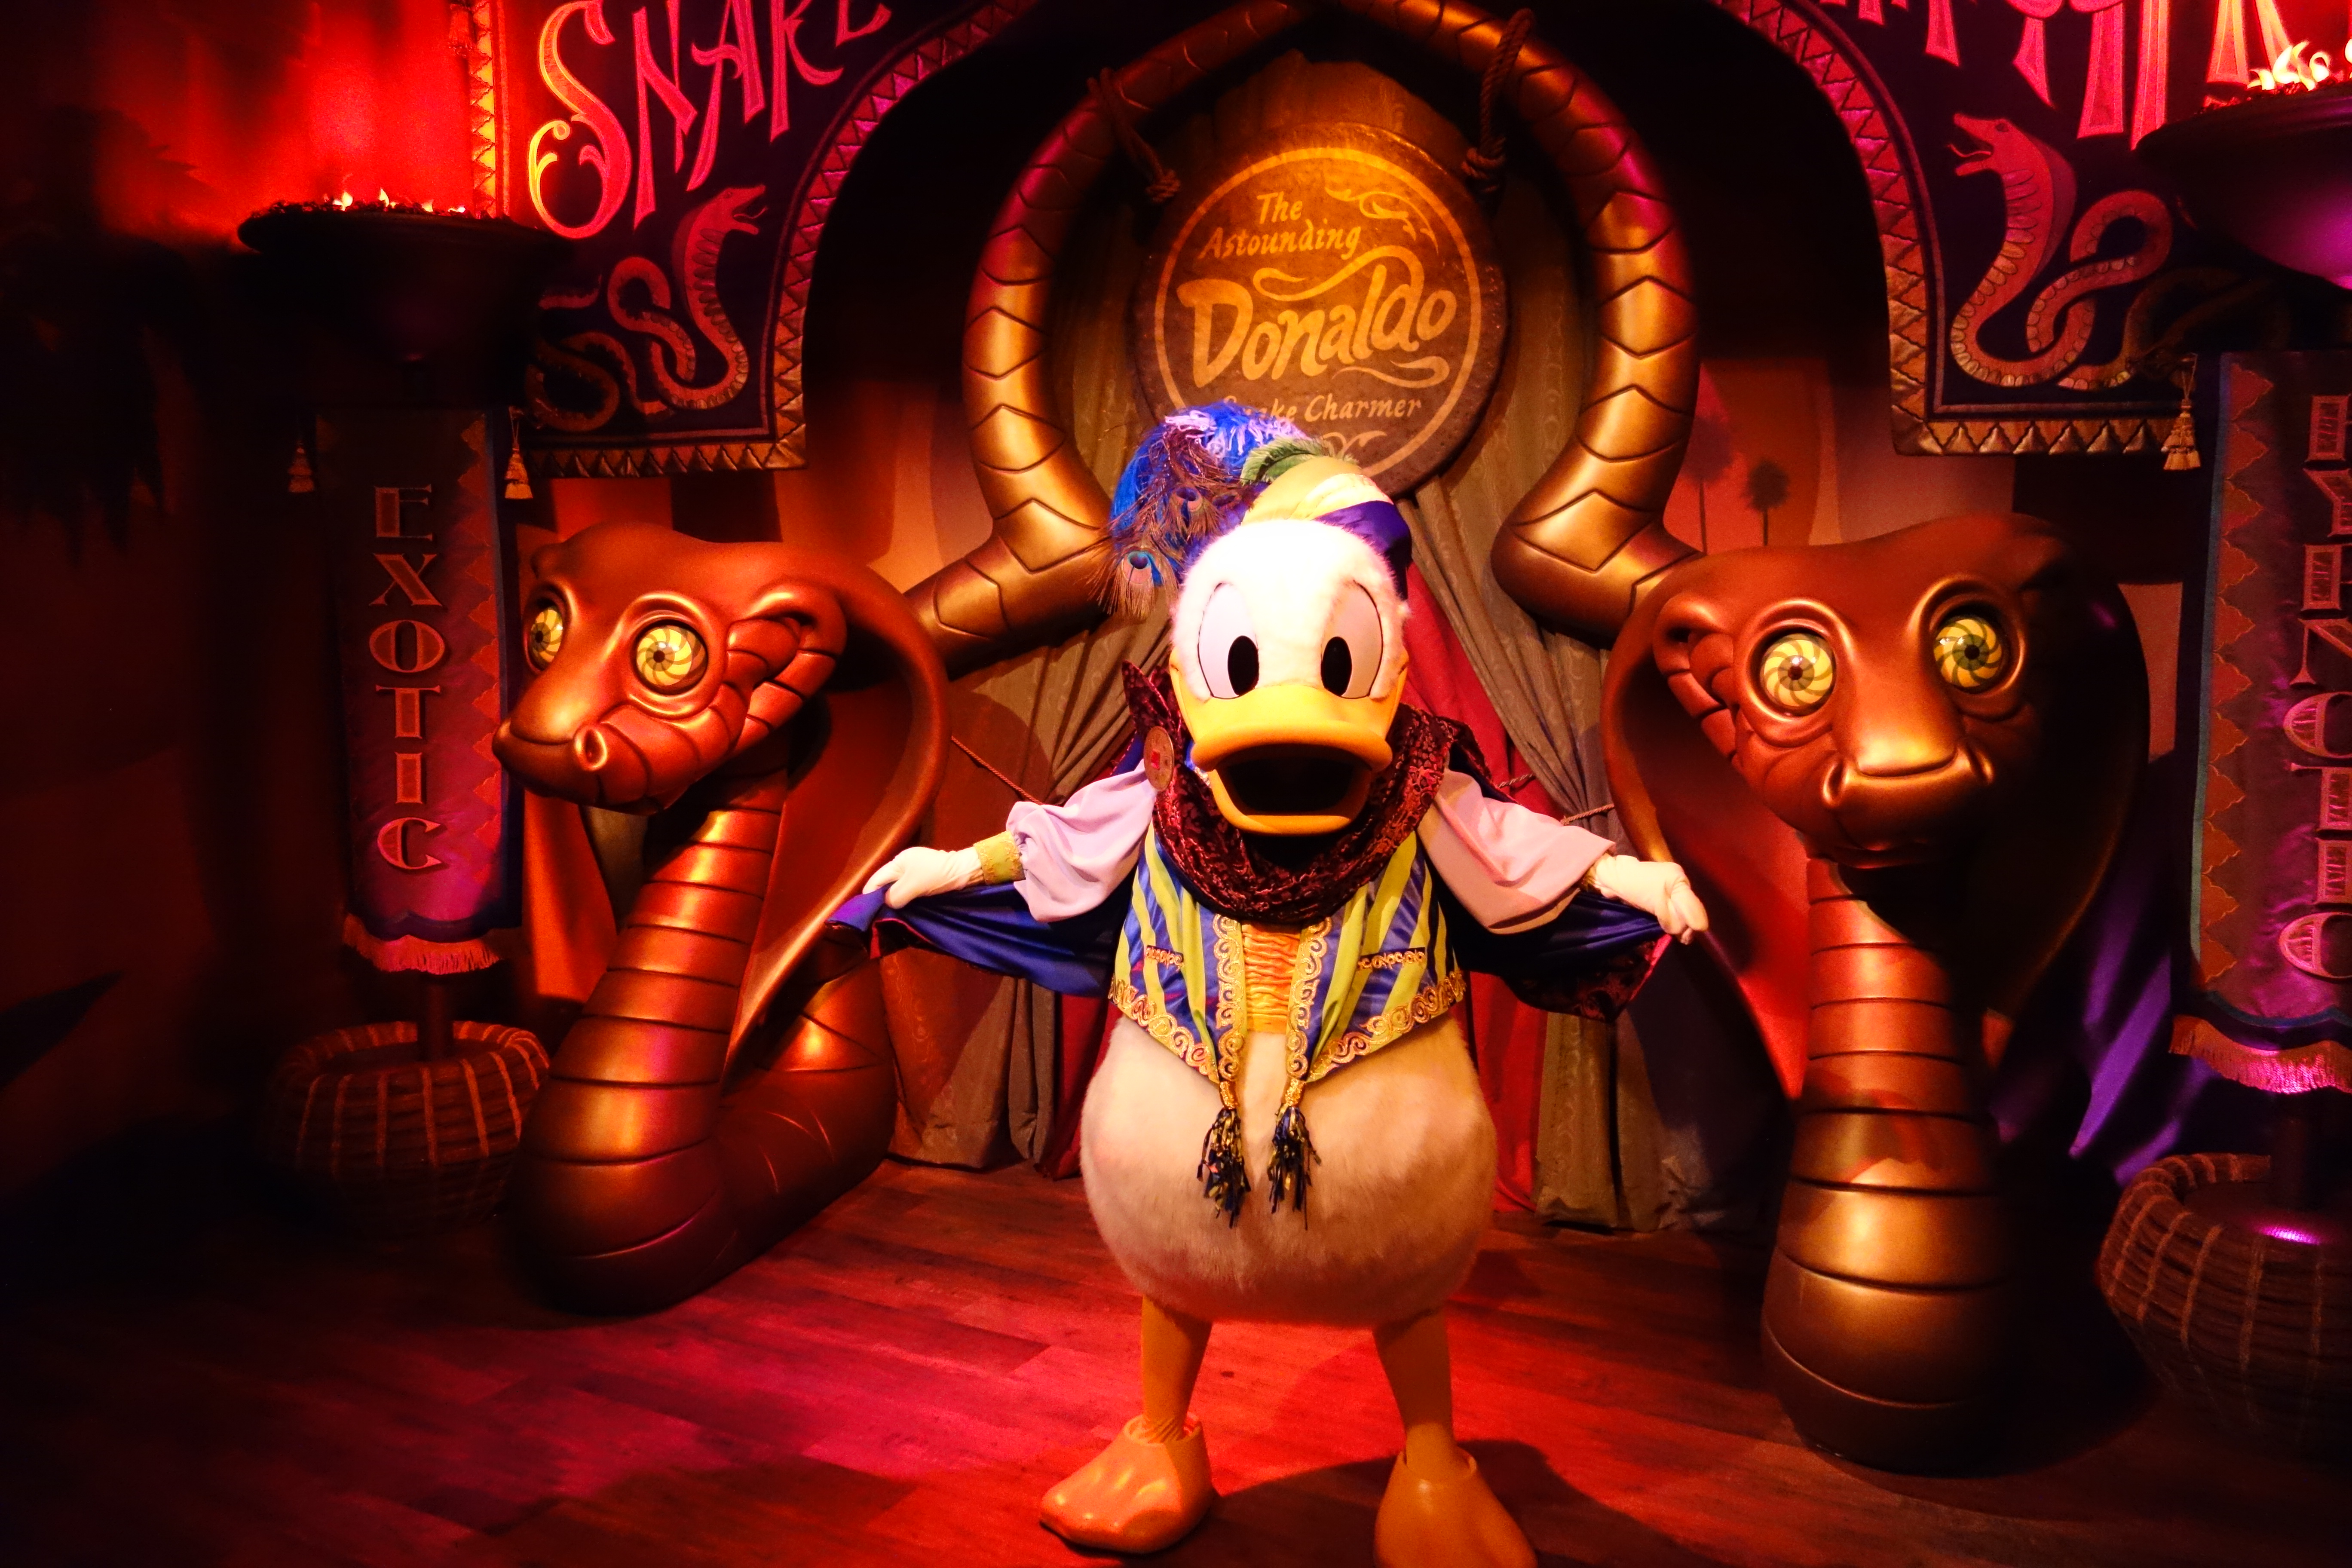 Donald Duck as "The Astounding Donaldo" in Pete's Silly Circus during early previews fall 2012